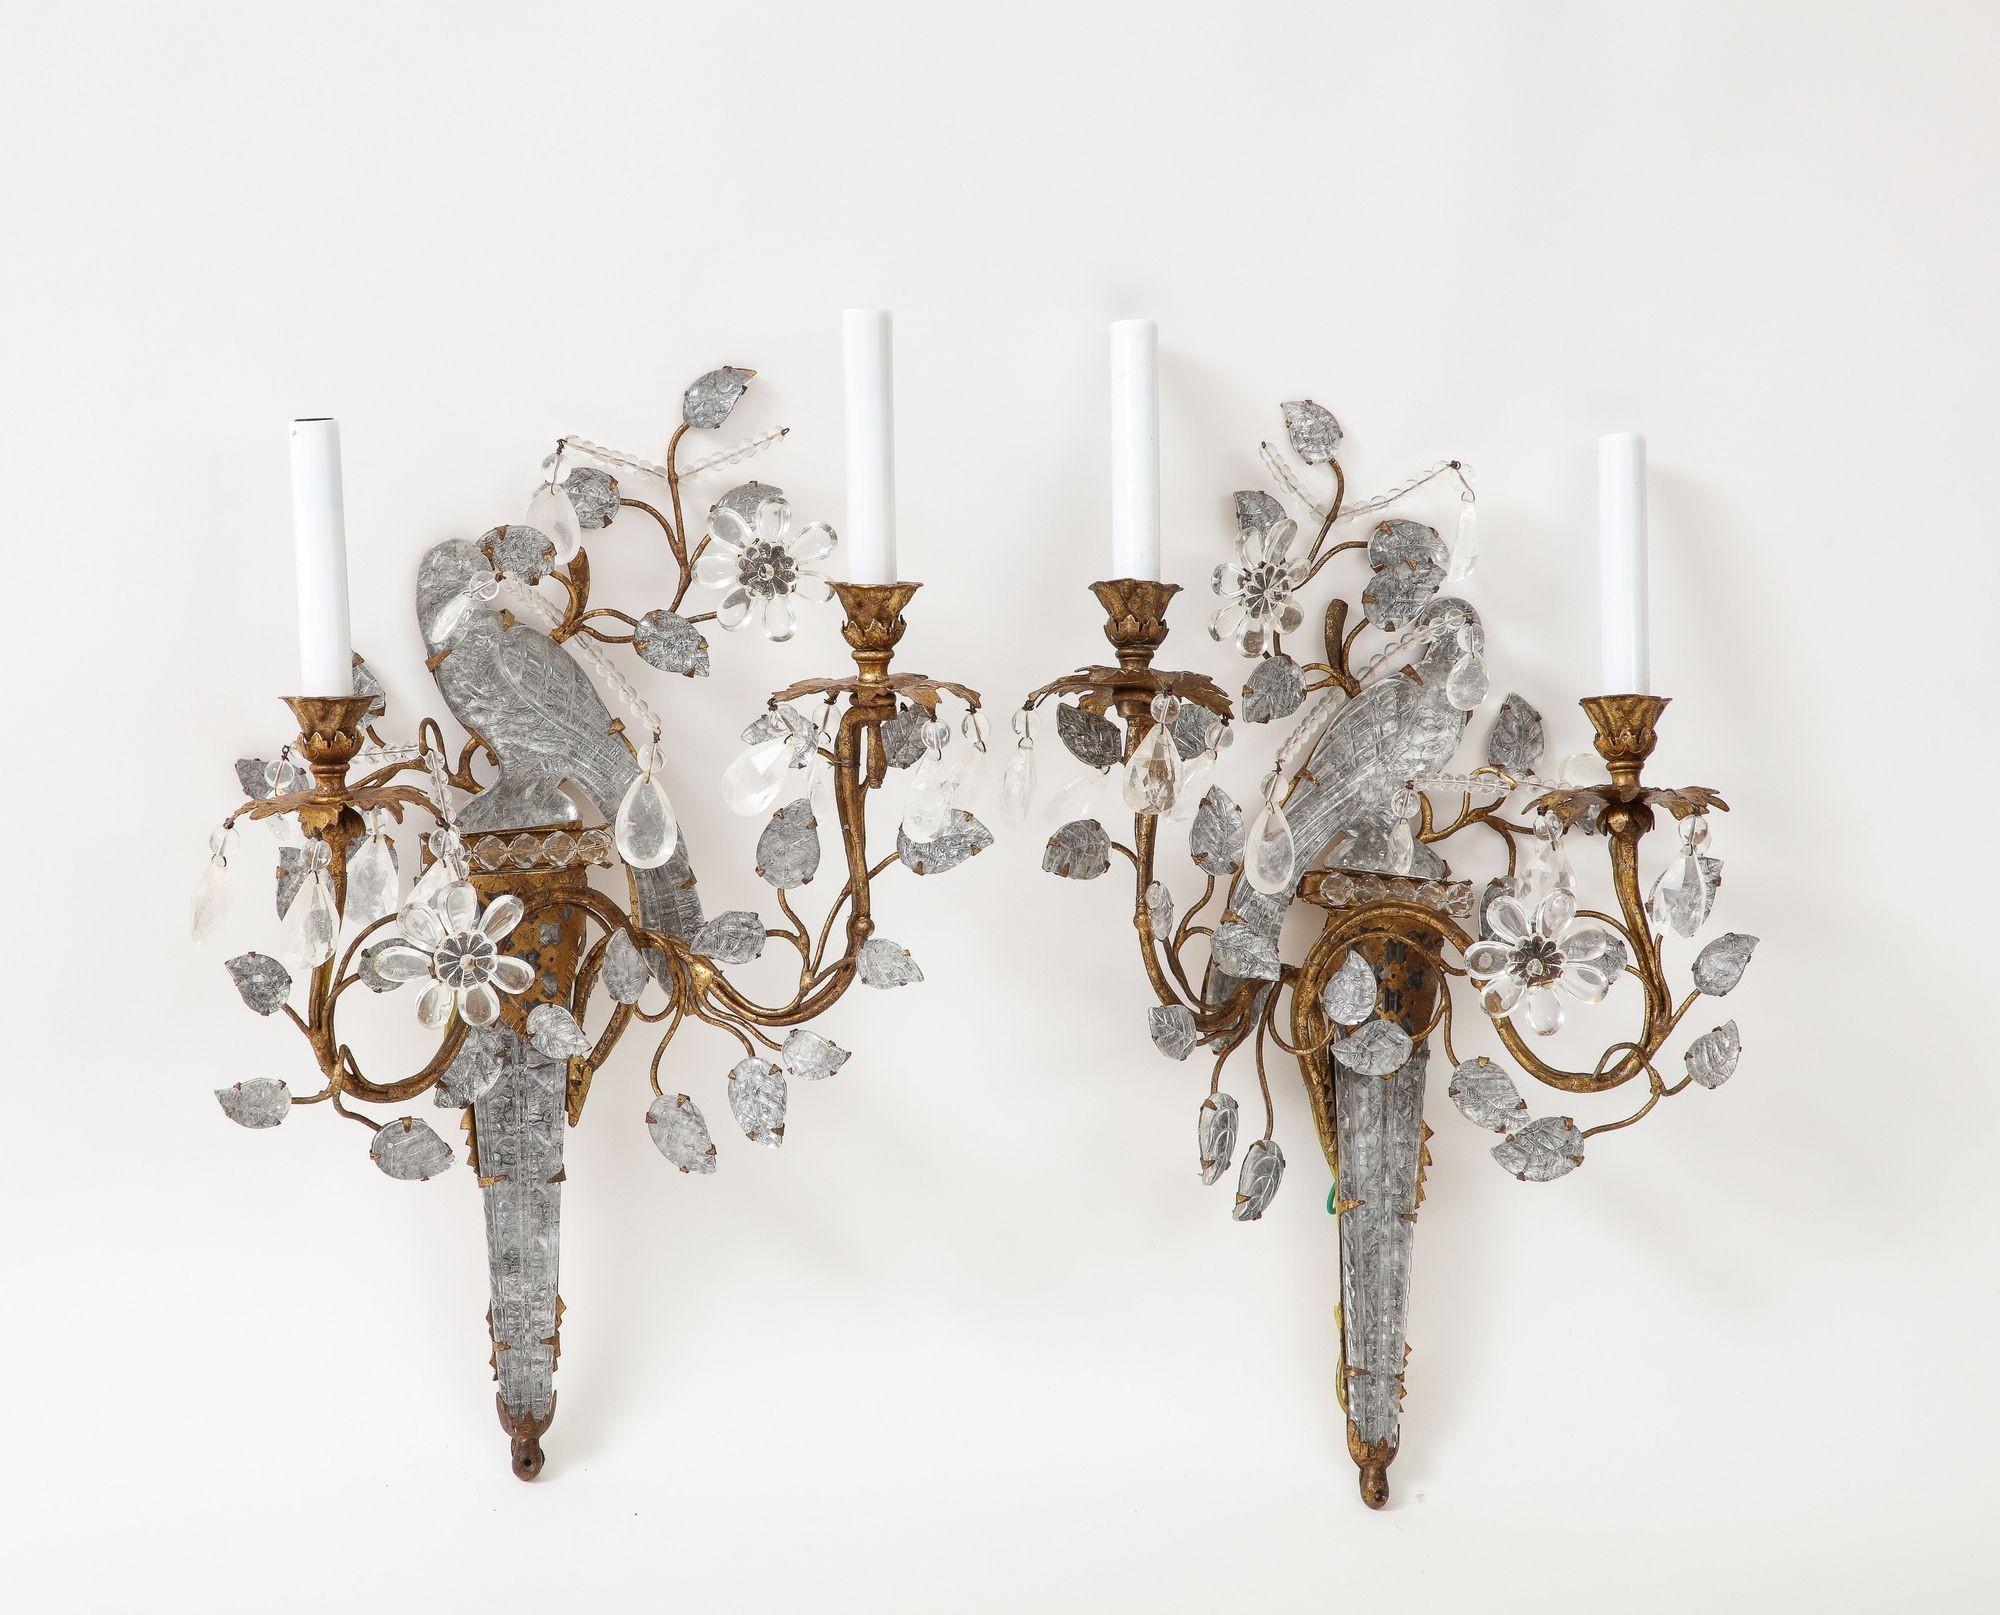 Four large vintage rock crystal bagues bird rock crystal sconces with two arm candles supported on flowering vines.